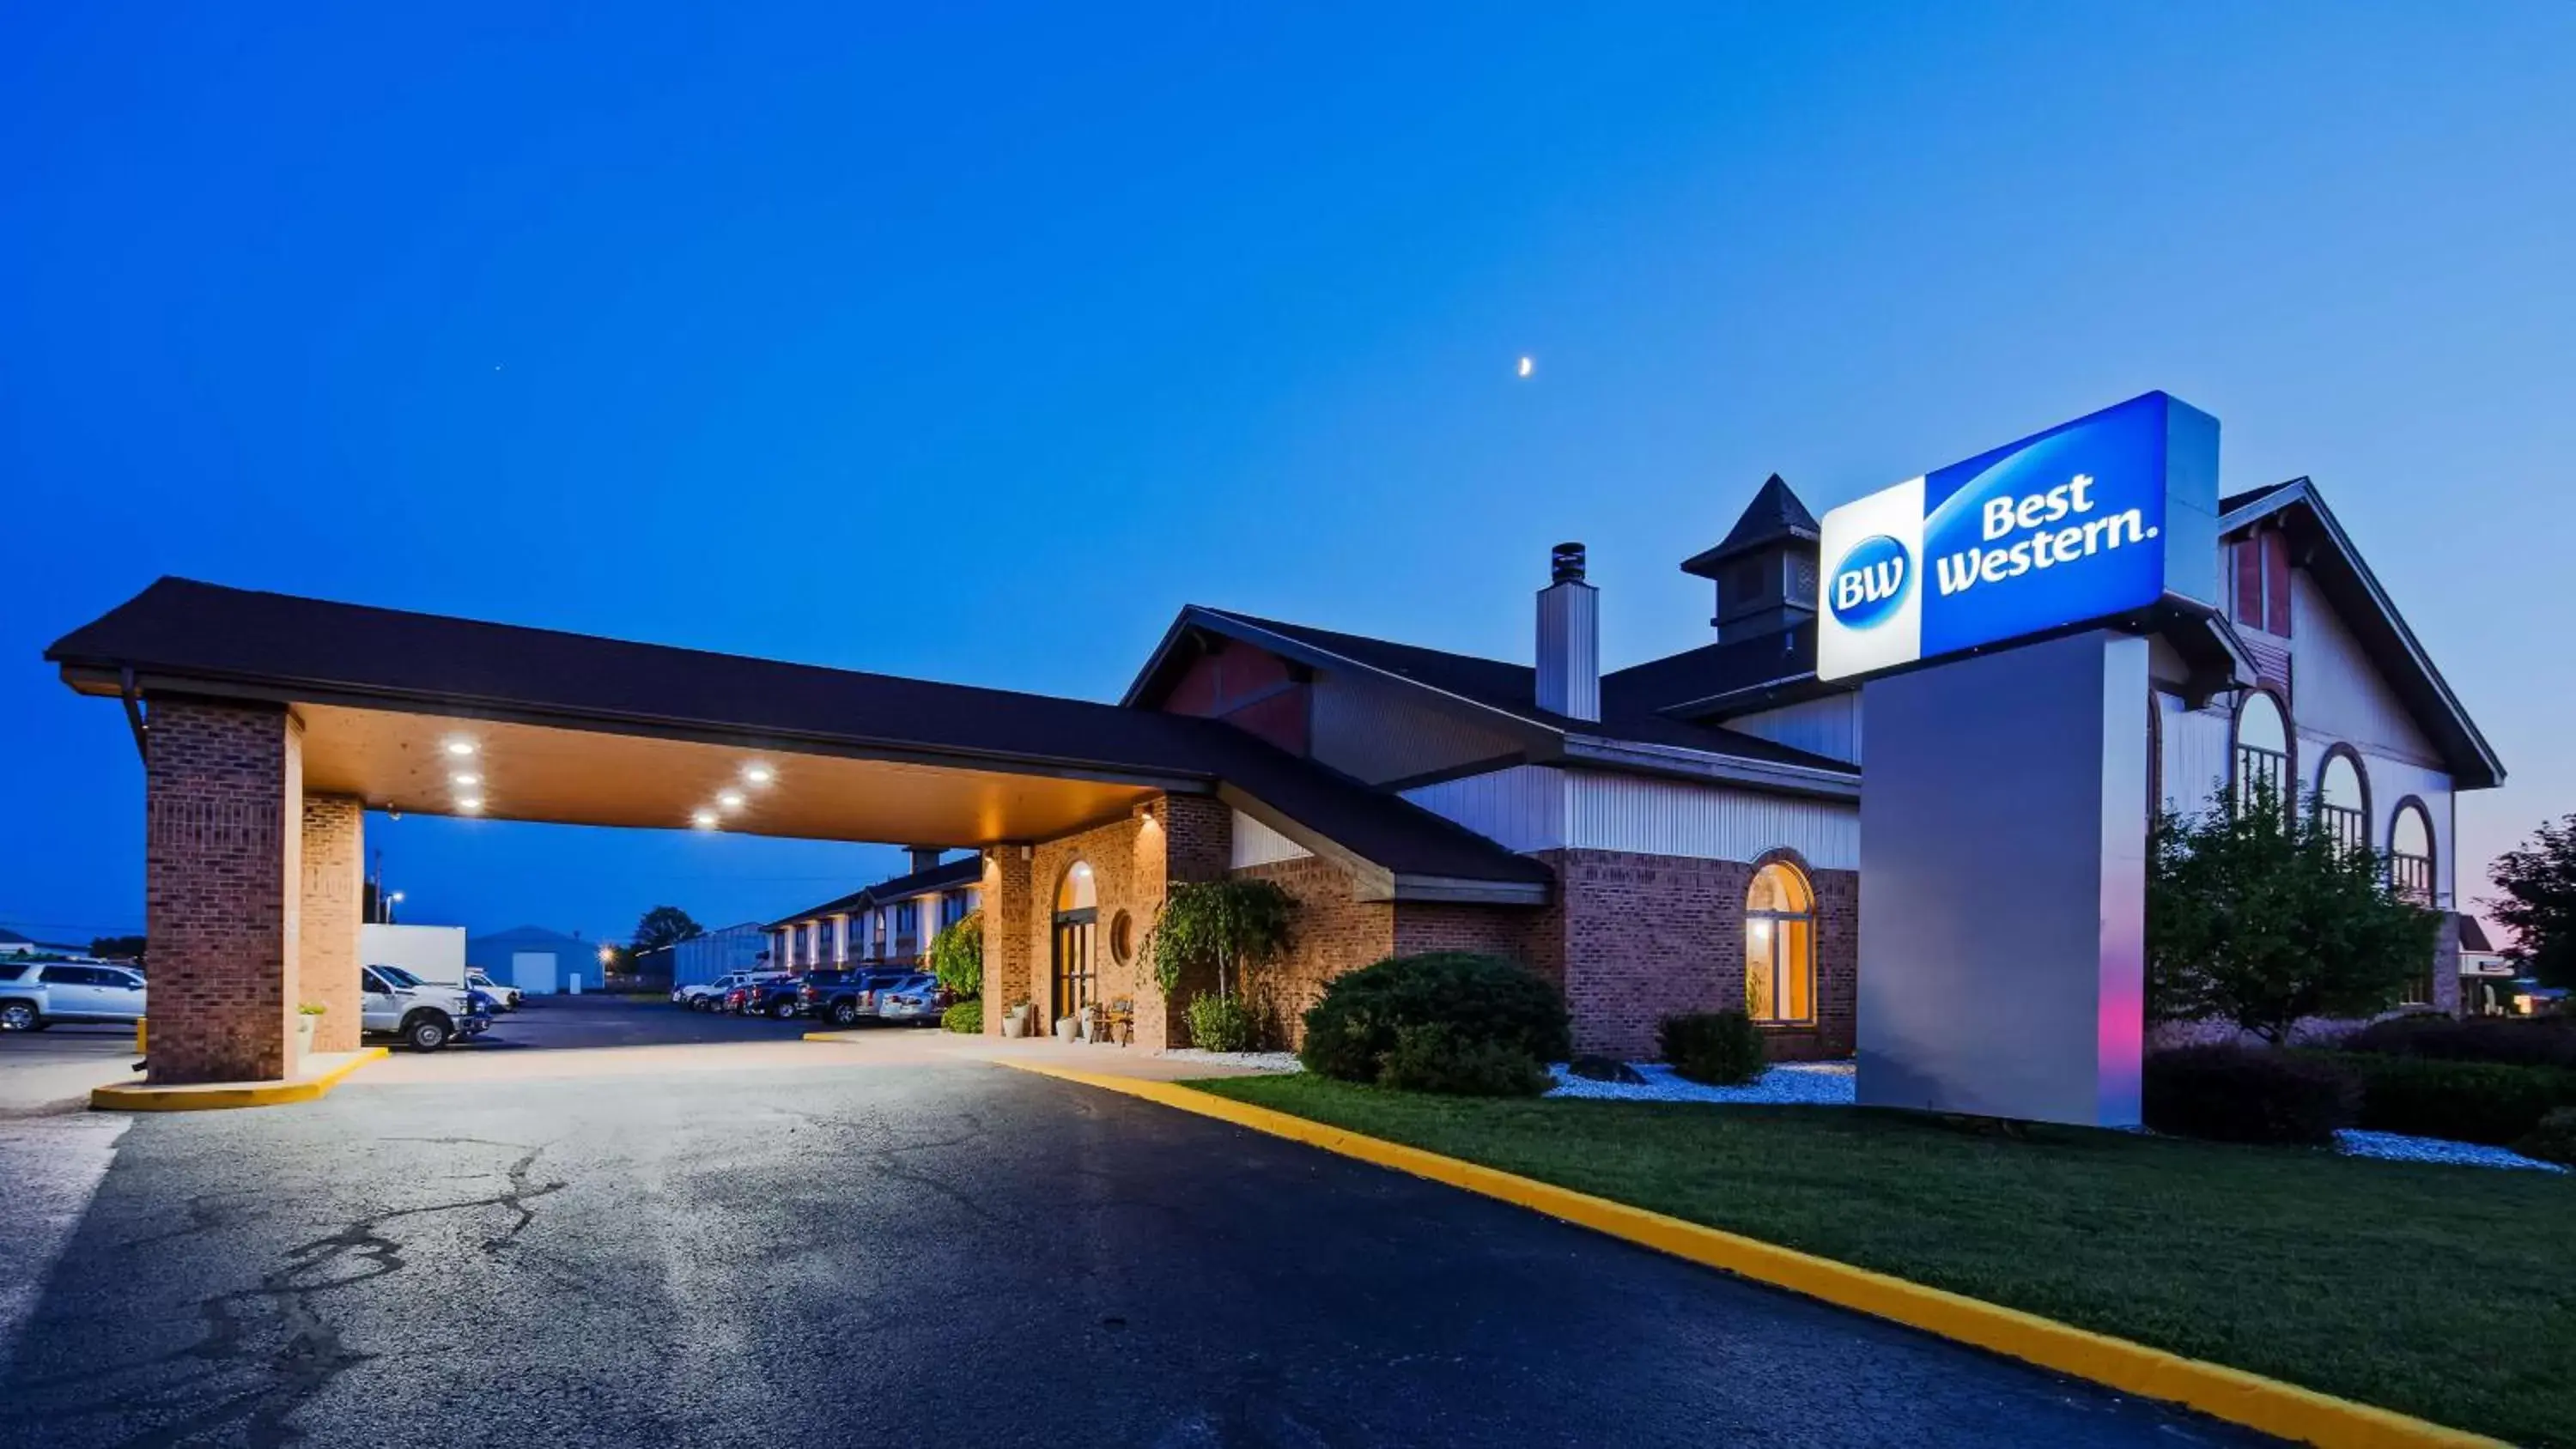 Property building in Best Western Gaylord